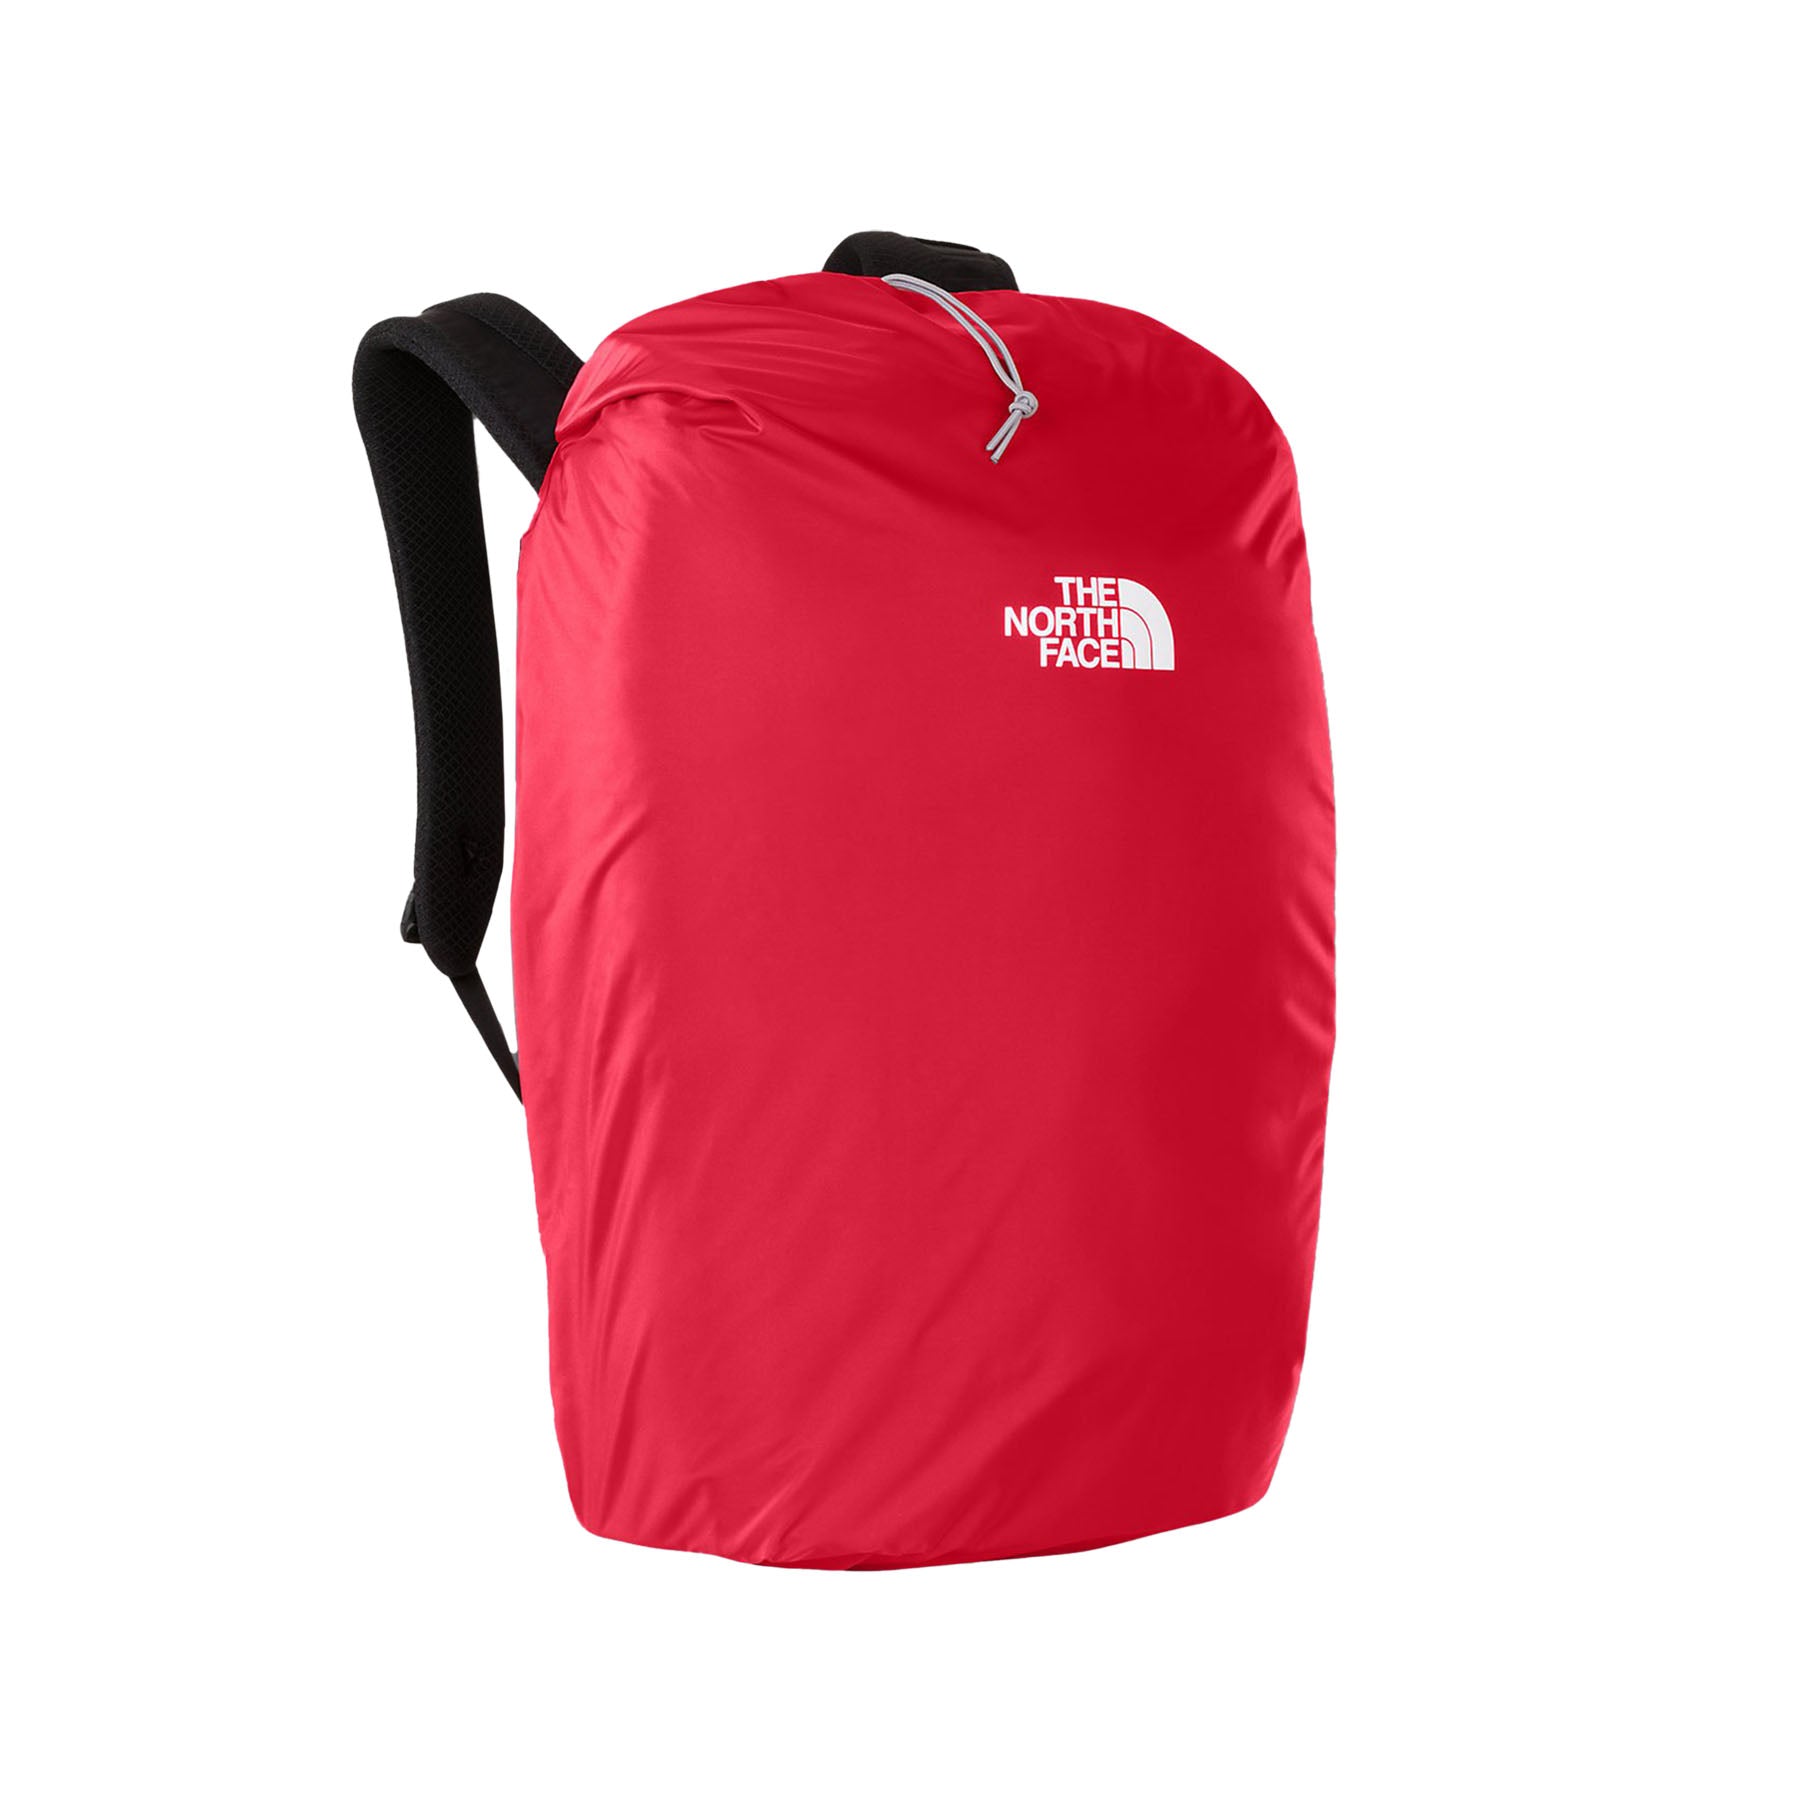 The North Face Pack Rain Cover - XS